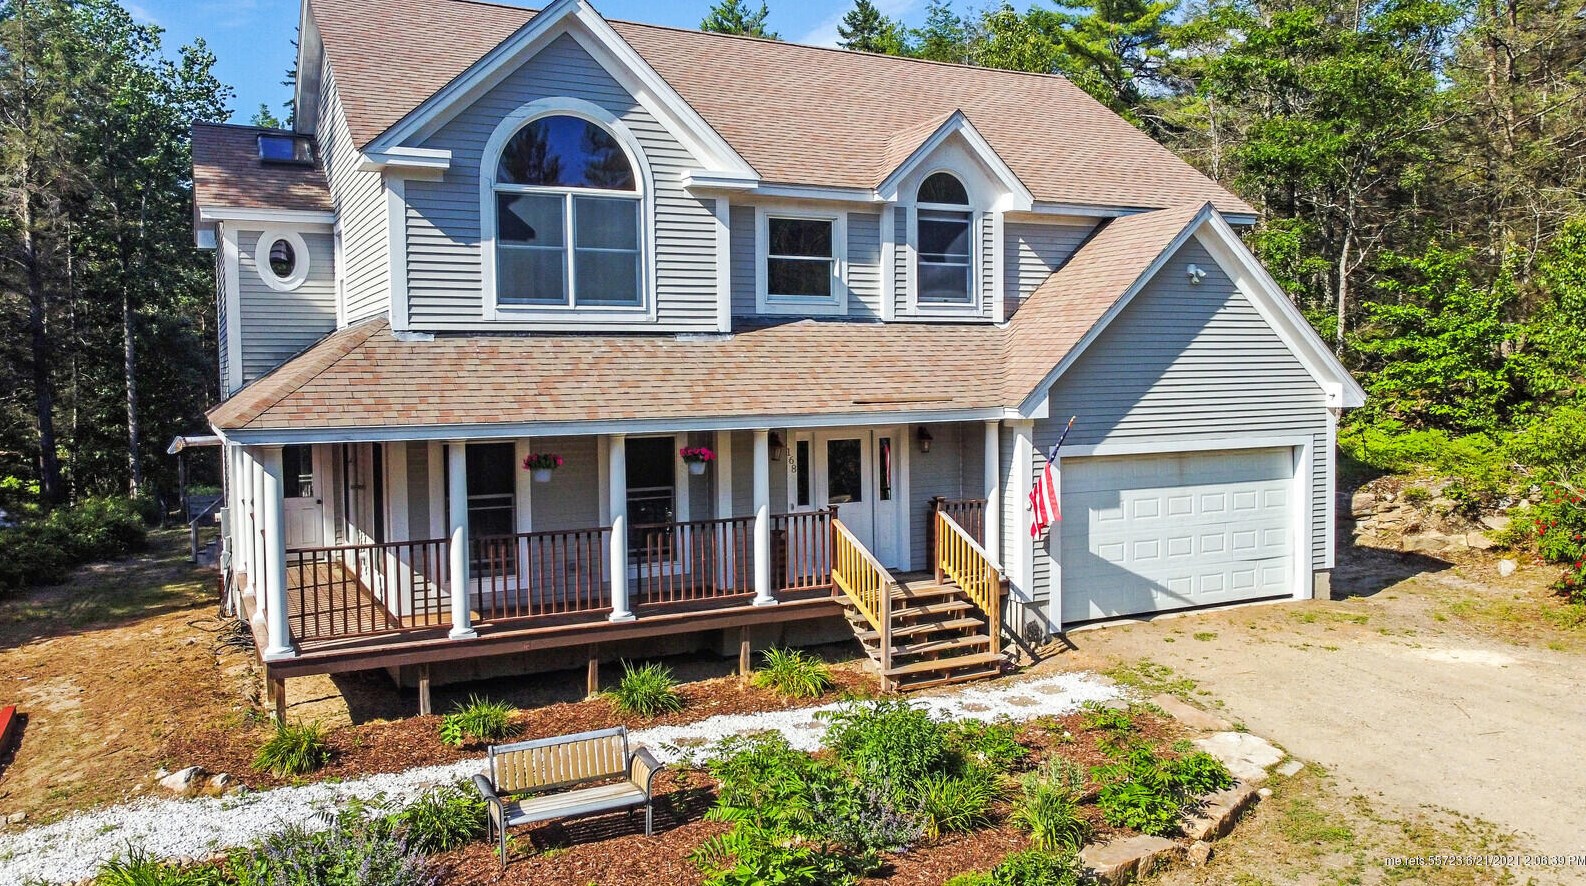 169 Stagecoach Rd, Woolwich, ME 04579 exterior